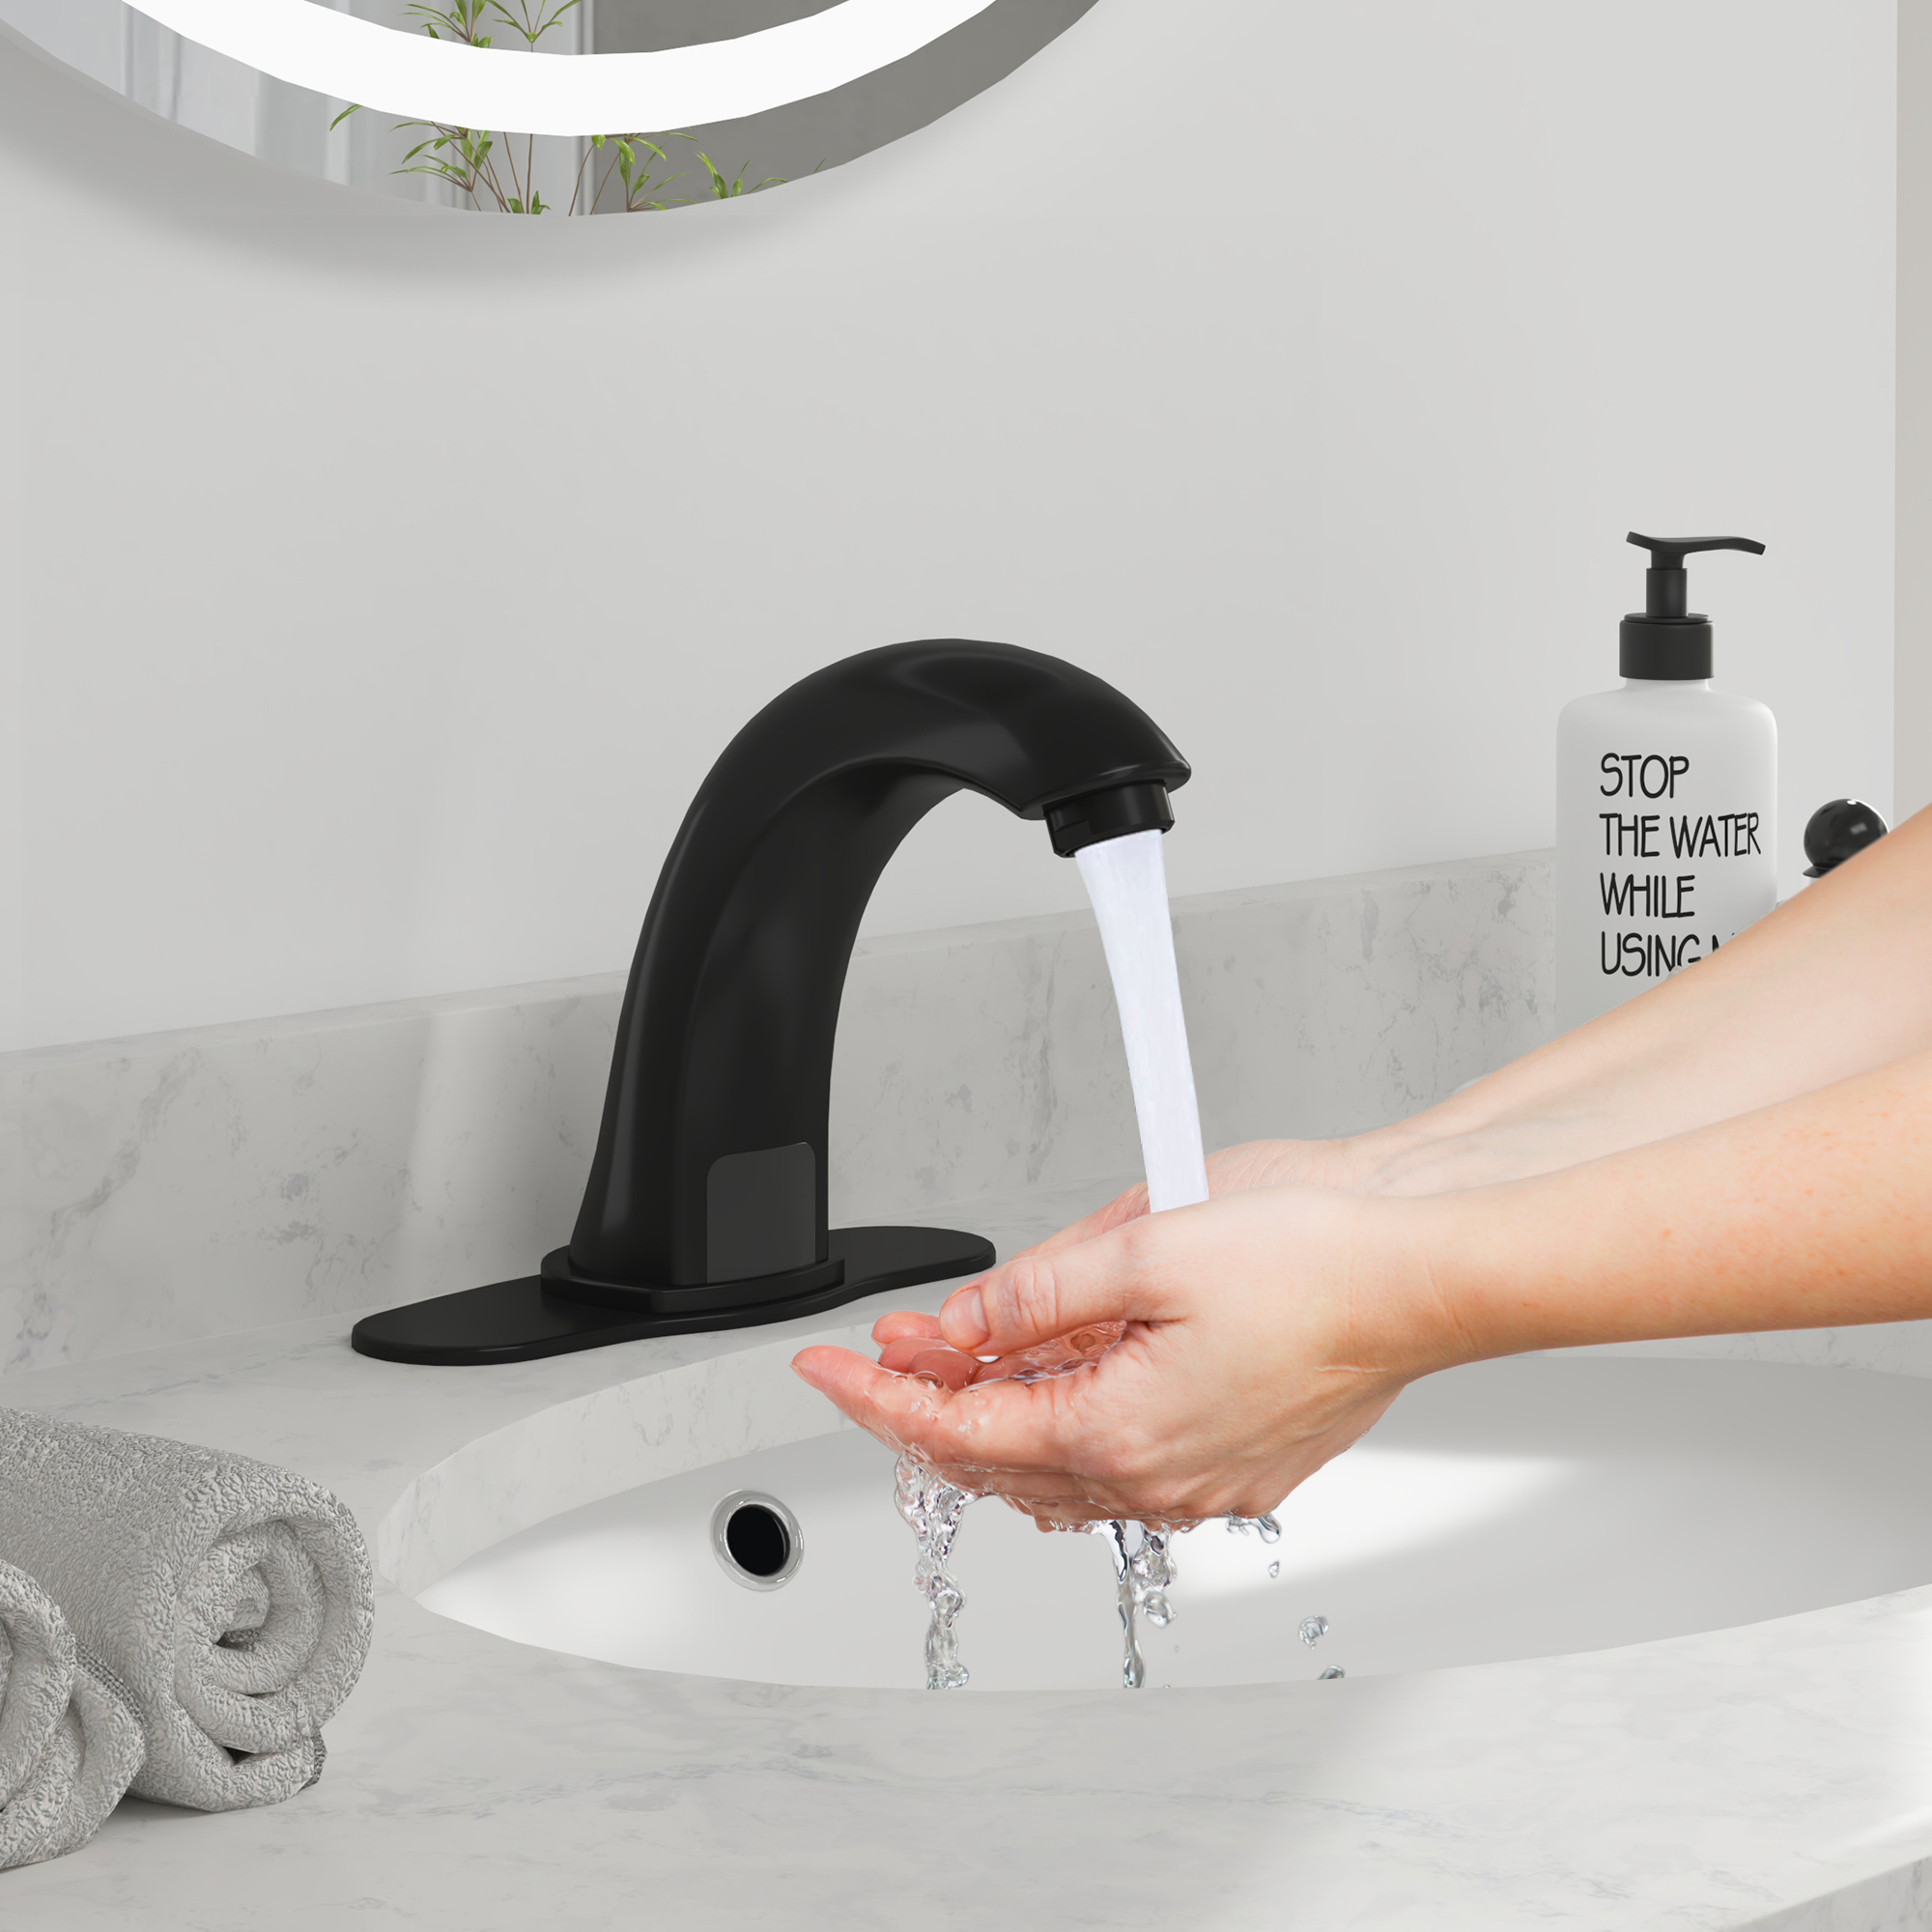 Hands-Free SensorTouchless Single Hole Bathroom Faucet in Chrome with Deck Plate and Valve